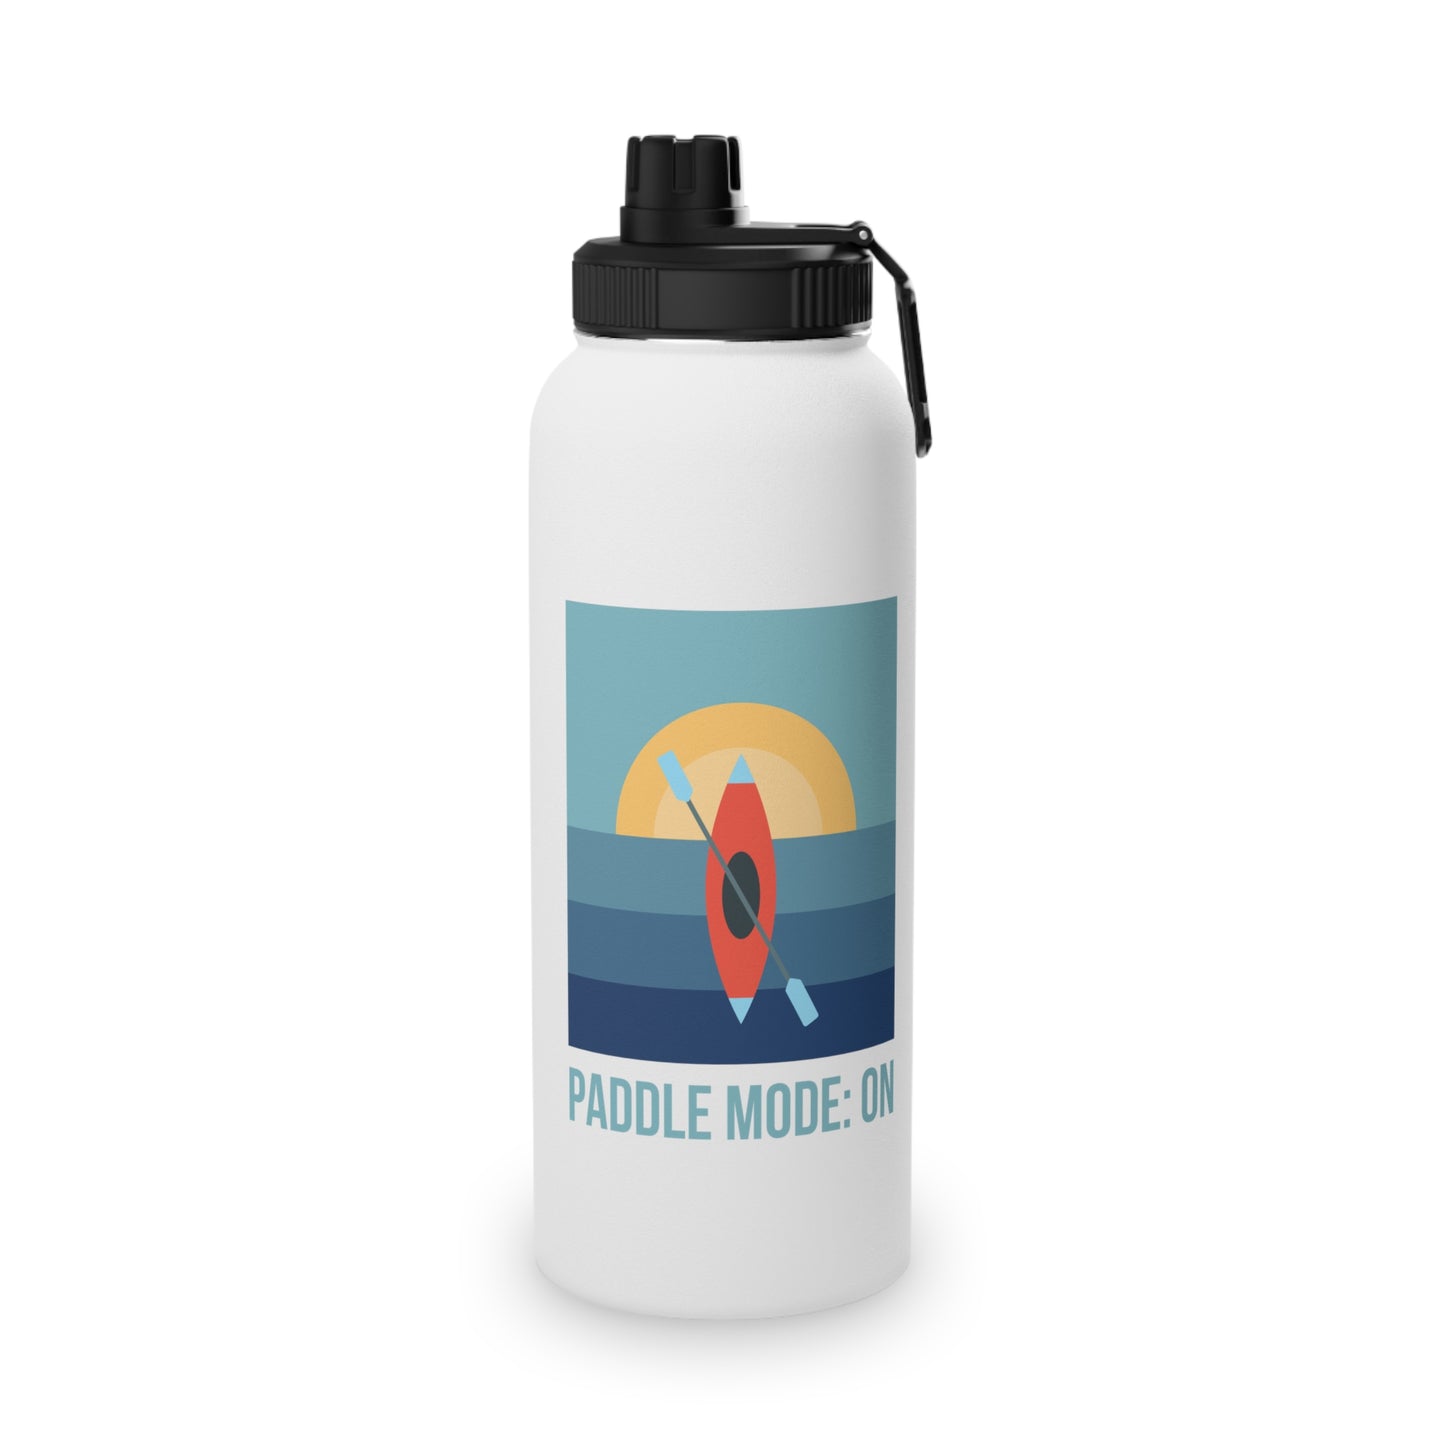 Paddle Mode: On Stainless Steel Water Bottle, Sports Lid